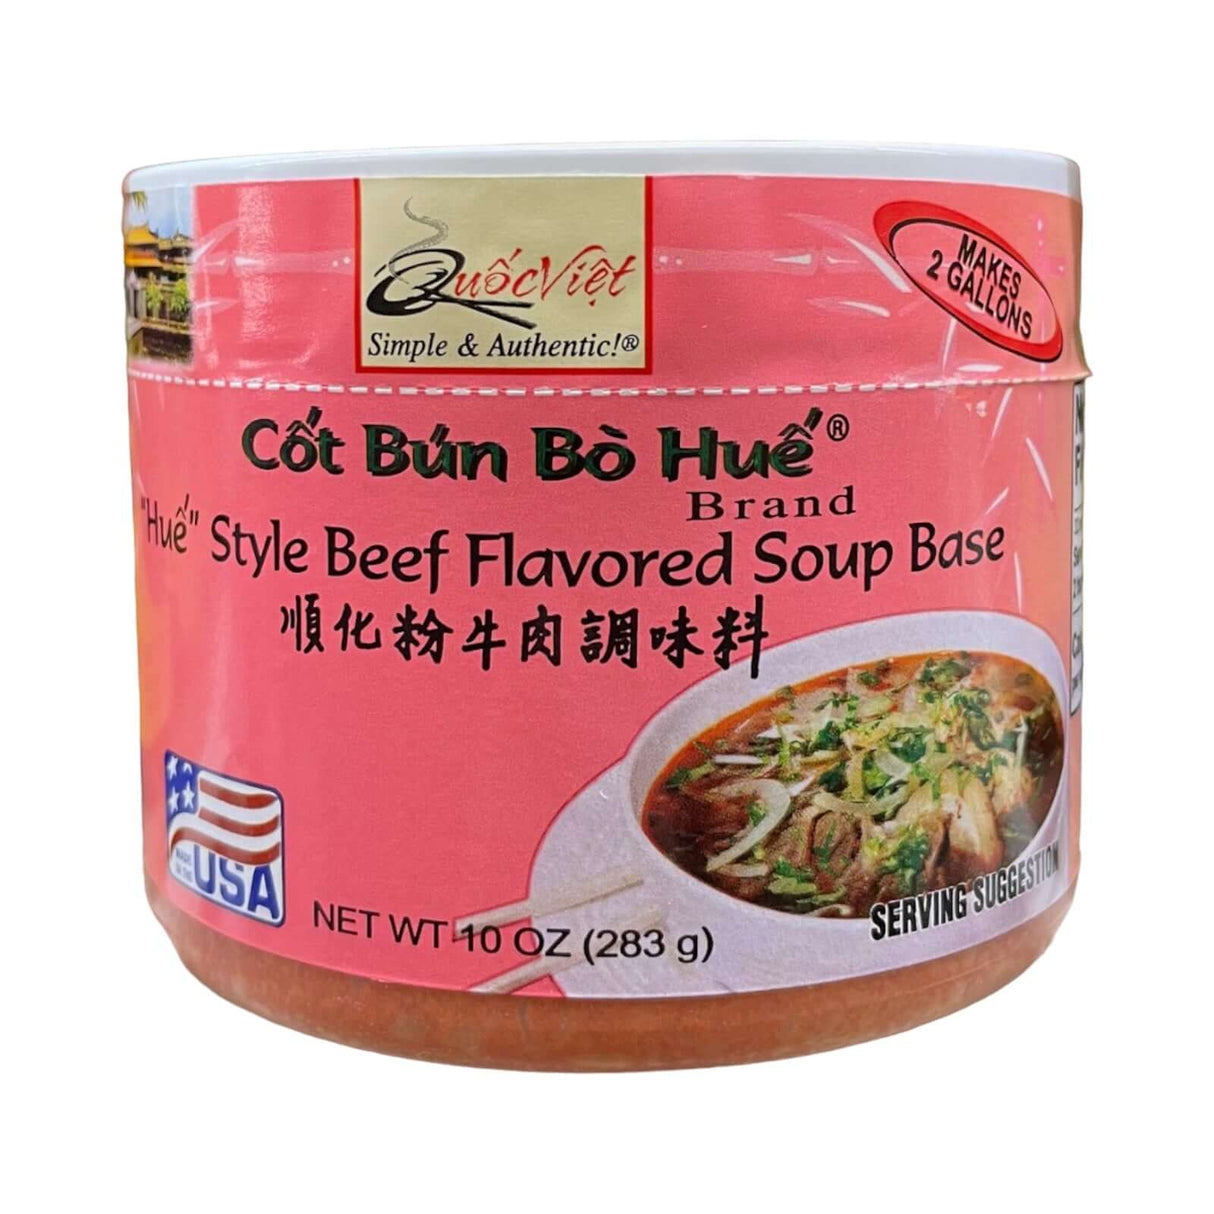 Quoc Viet Foods Hue Style Beef Flavored Soup Base (Cot Bun Bo Hue)